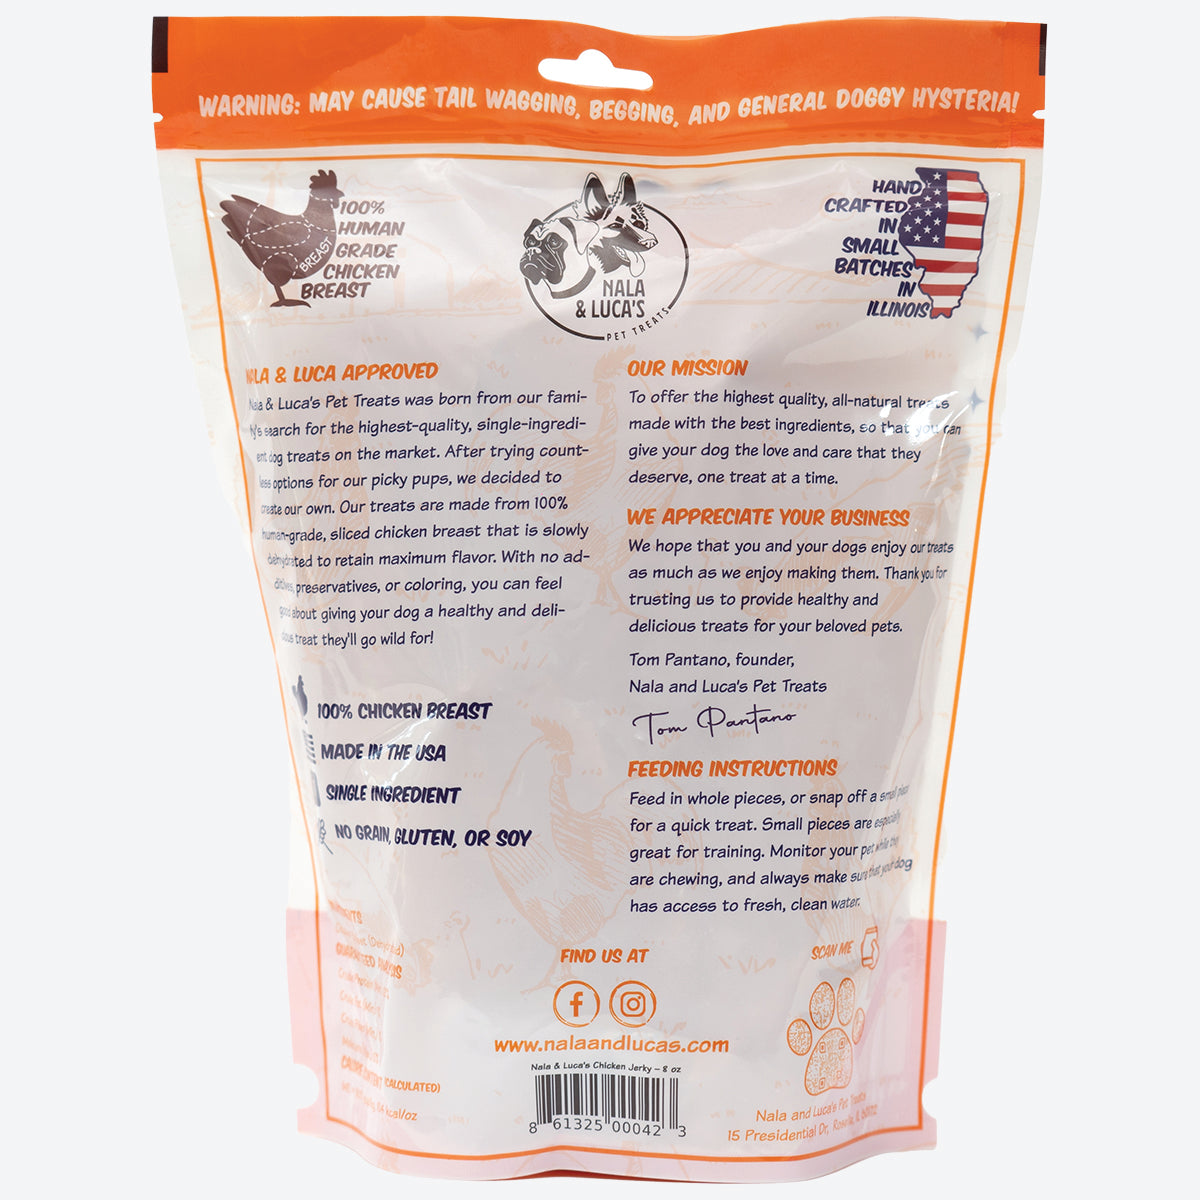 Nala And Luca's Chicken Jerky 8oz - "The 1 Pack"